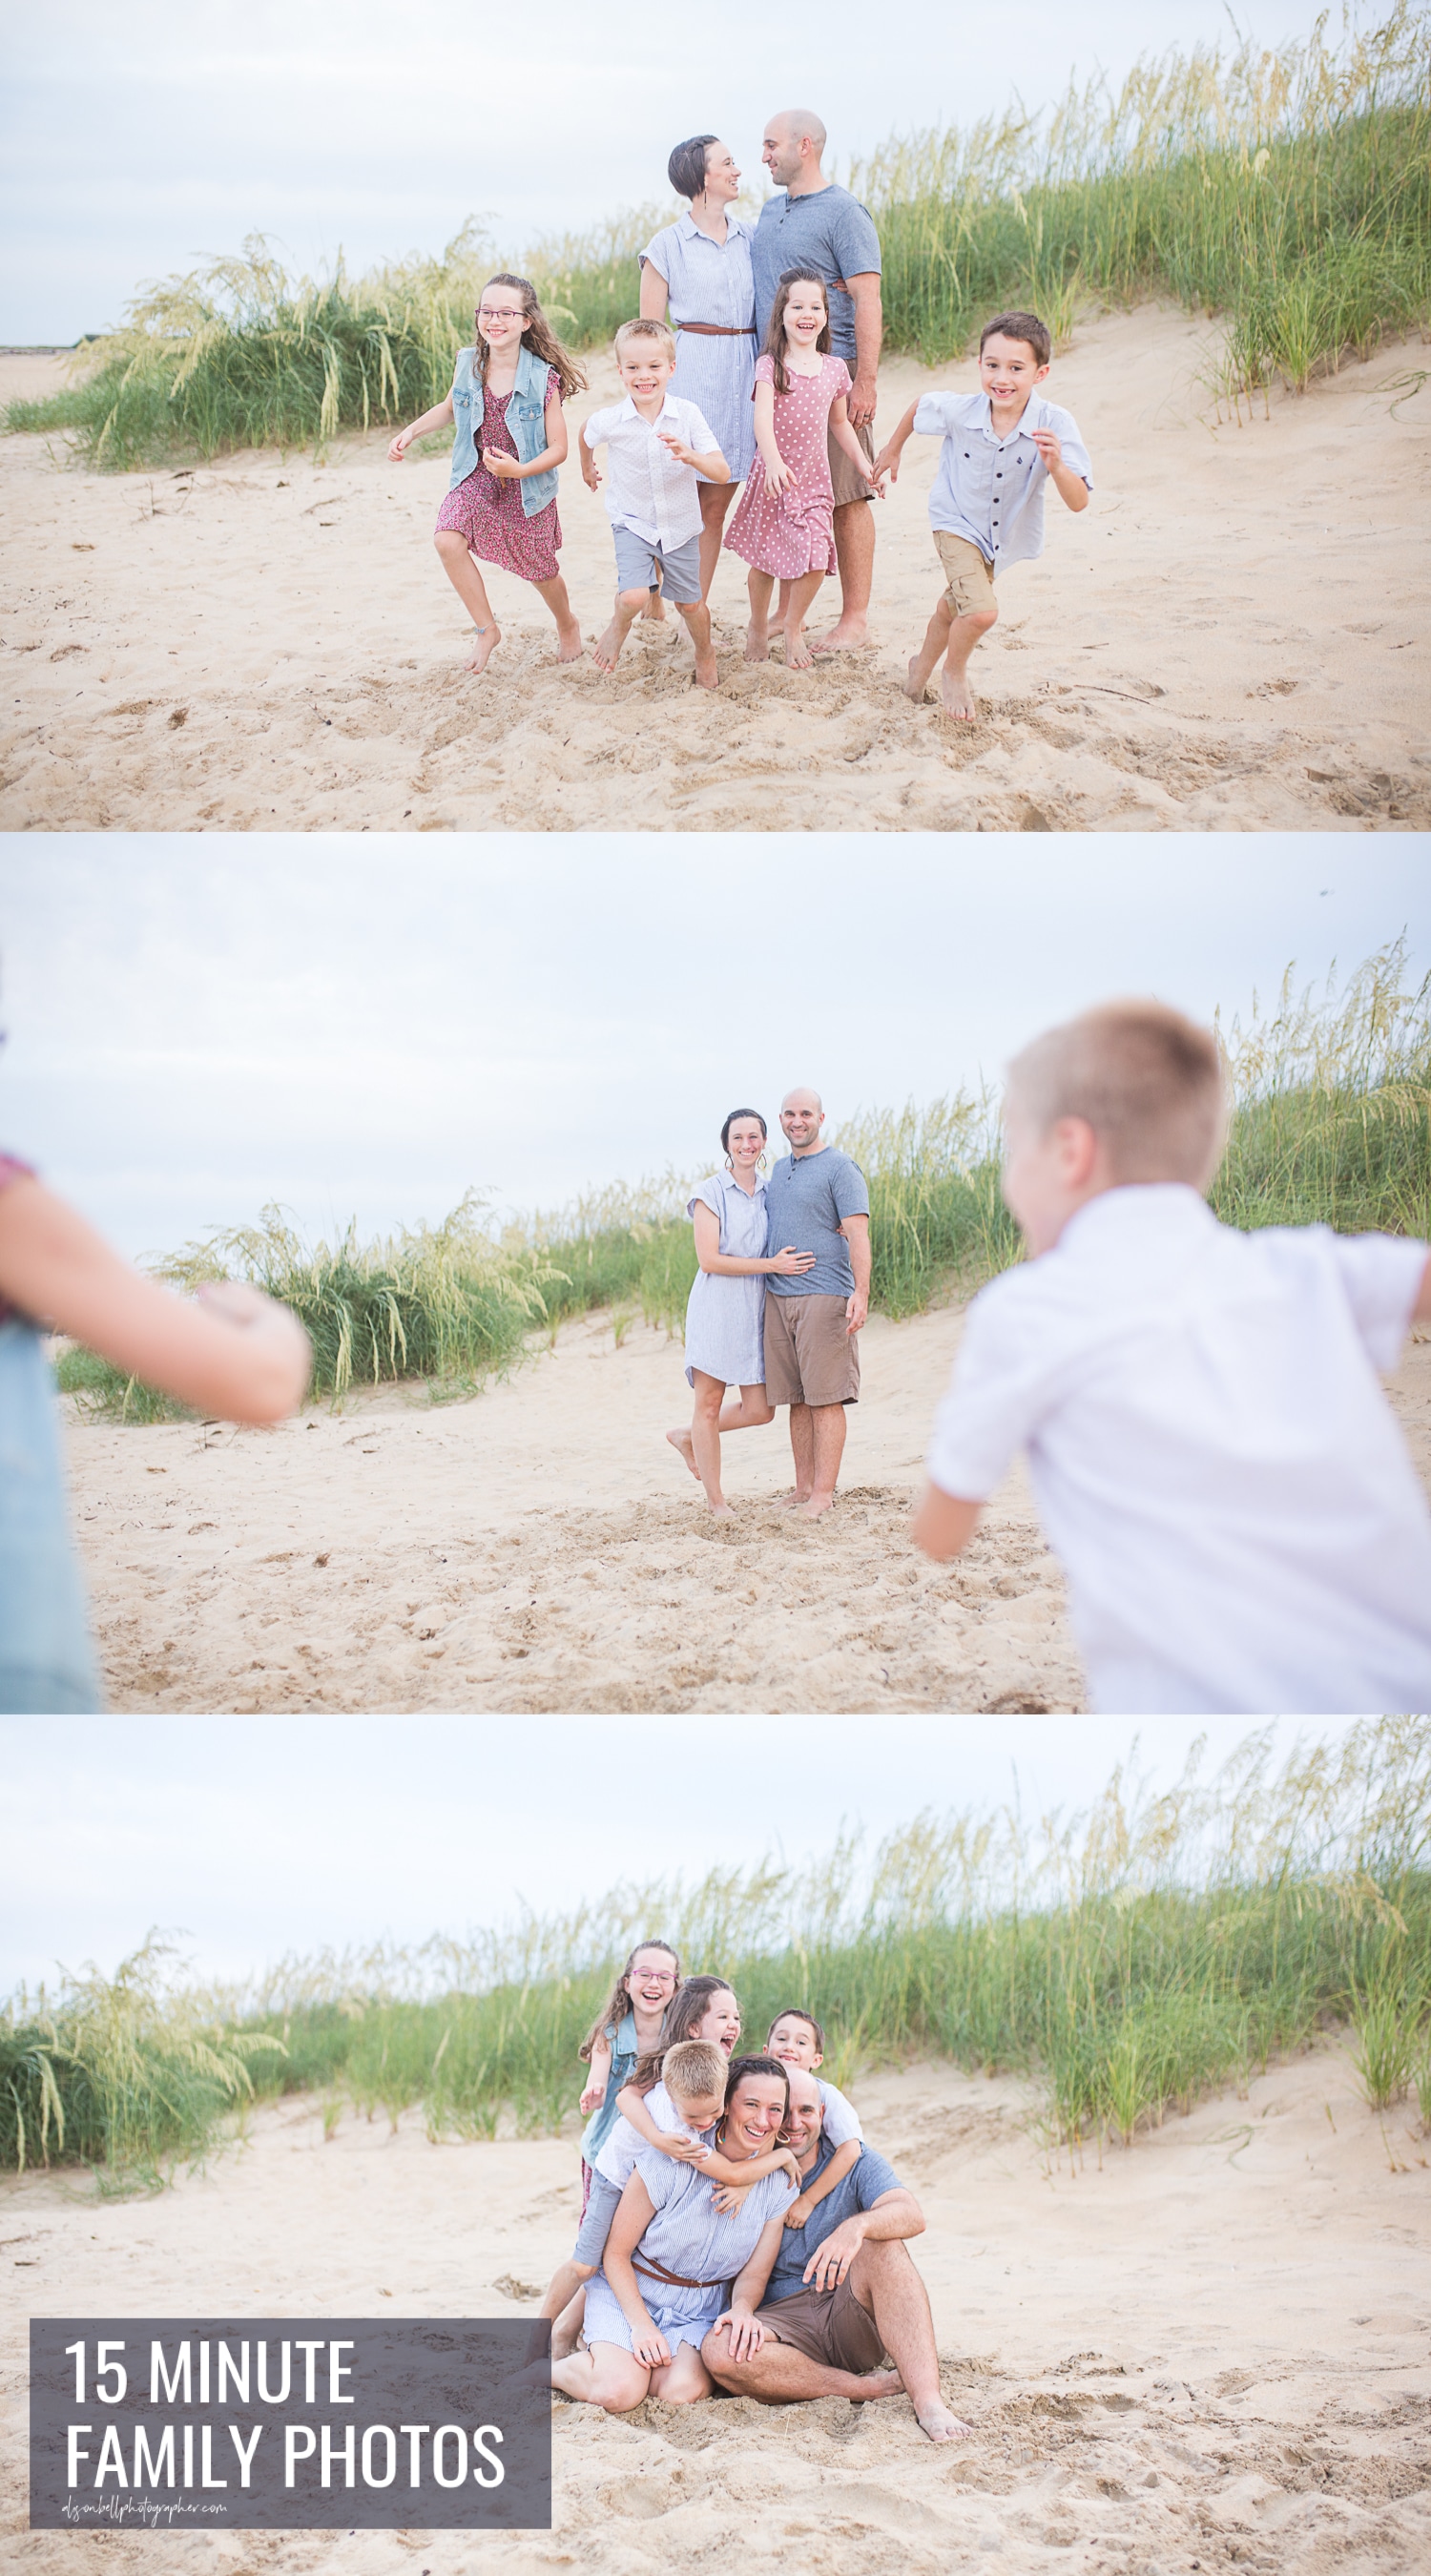 15 minute family mini photo session at East Beach, Norfolk by Alison Bell Photographer